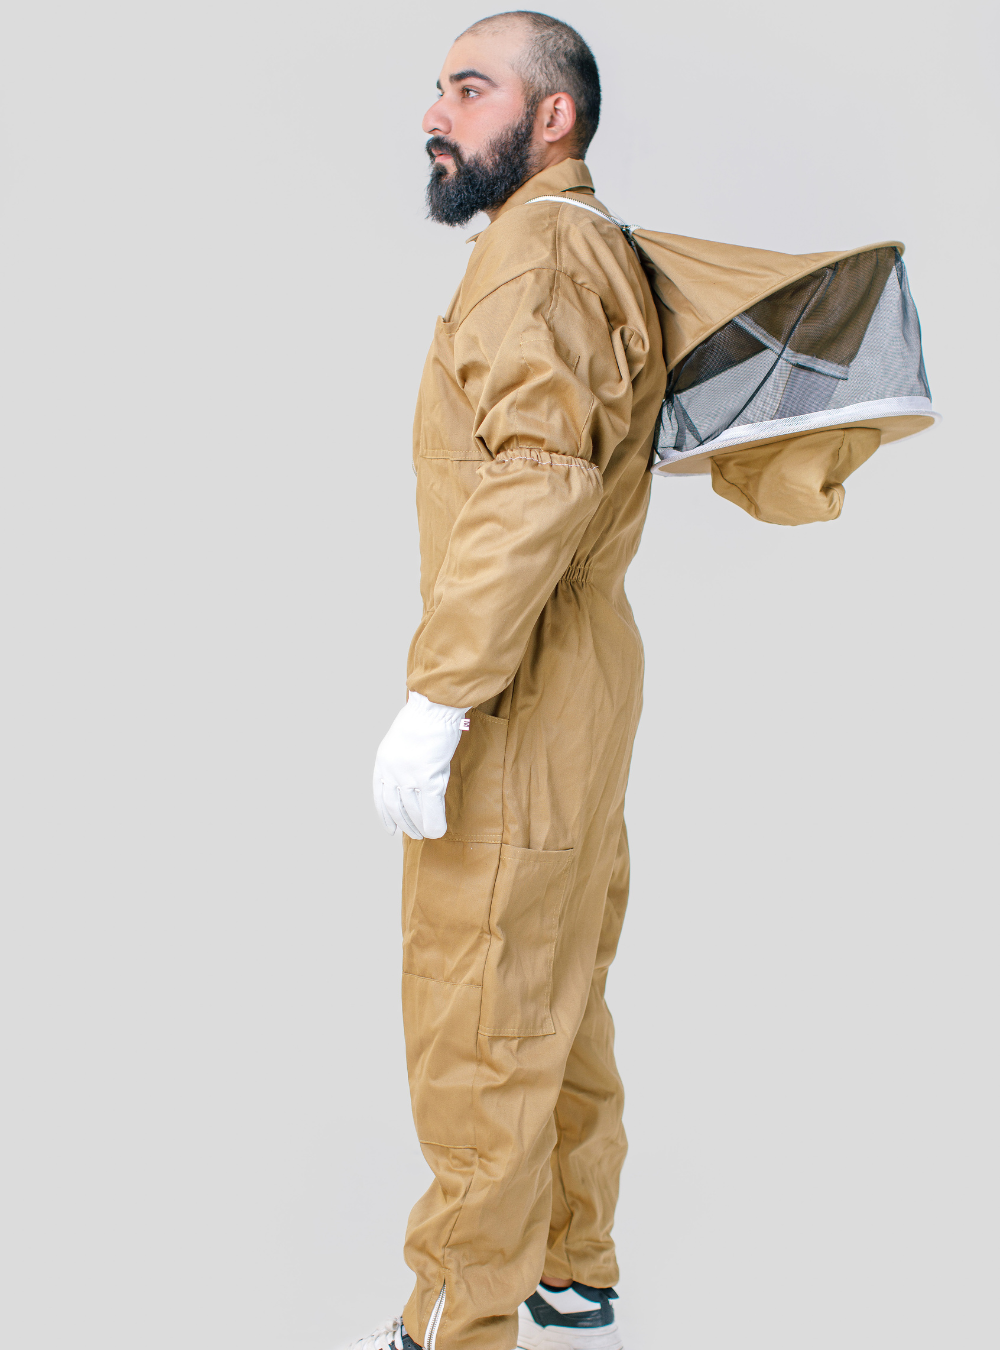 Brown Cotton Apiarist Outfit incorporates a zippered front closure, Detachable hood, matching Gloves and, double-stitched construction Back look.